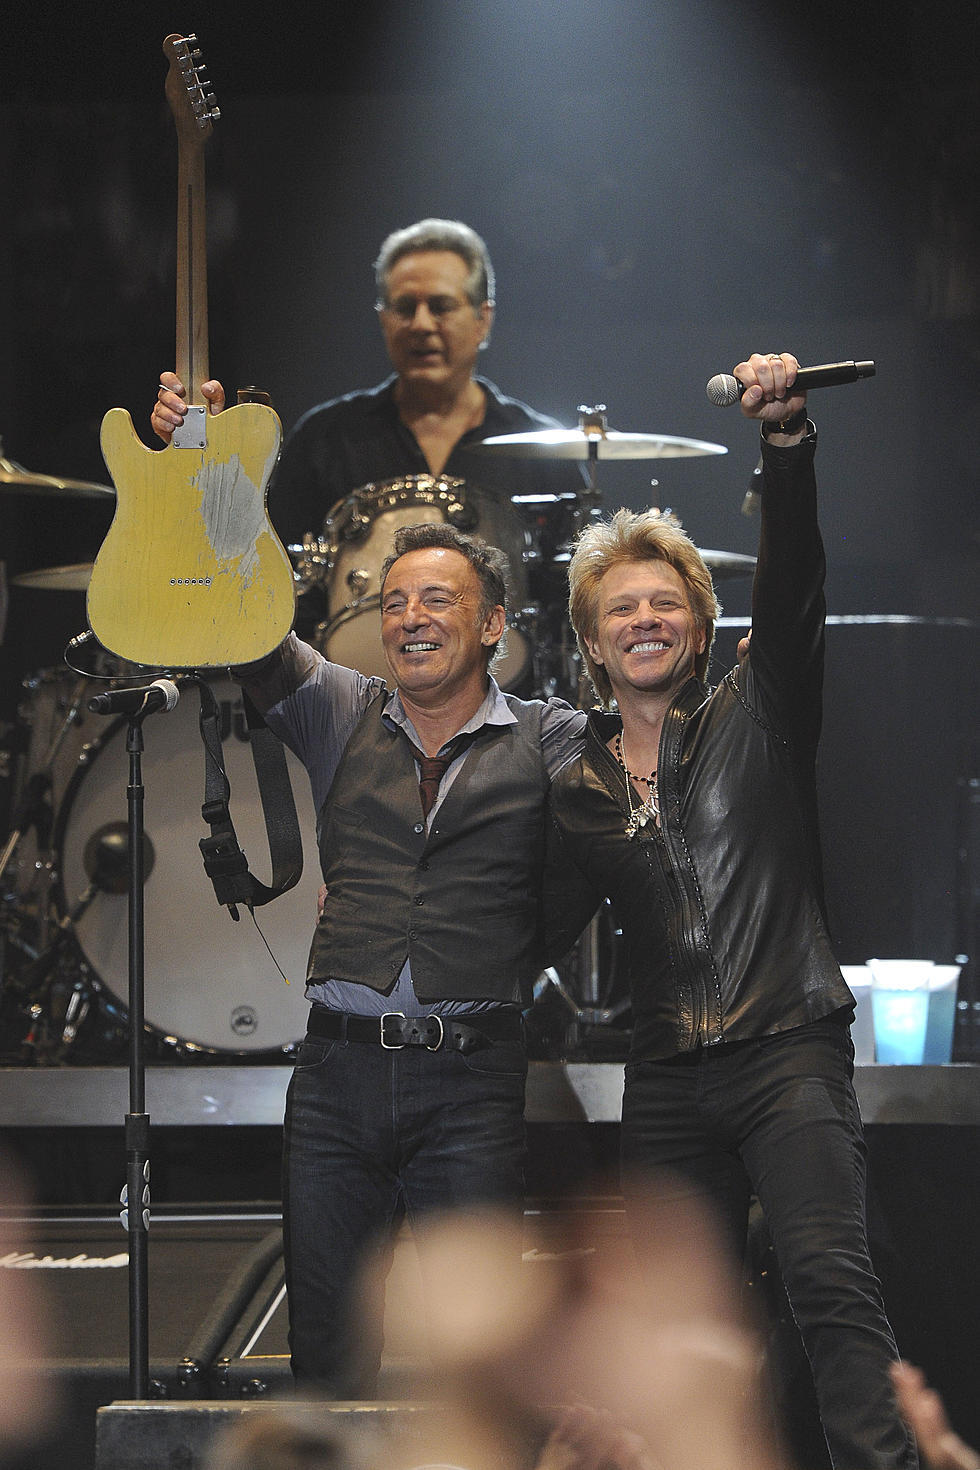 Who would make a better Vice President: Springsteen or Bon Jovi? (Poll)